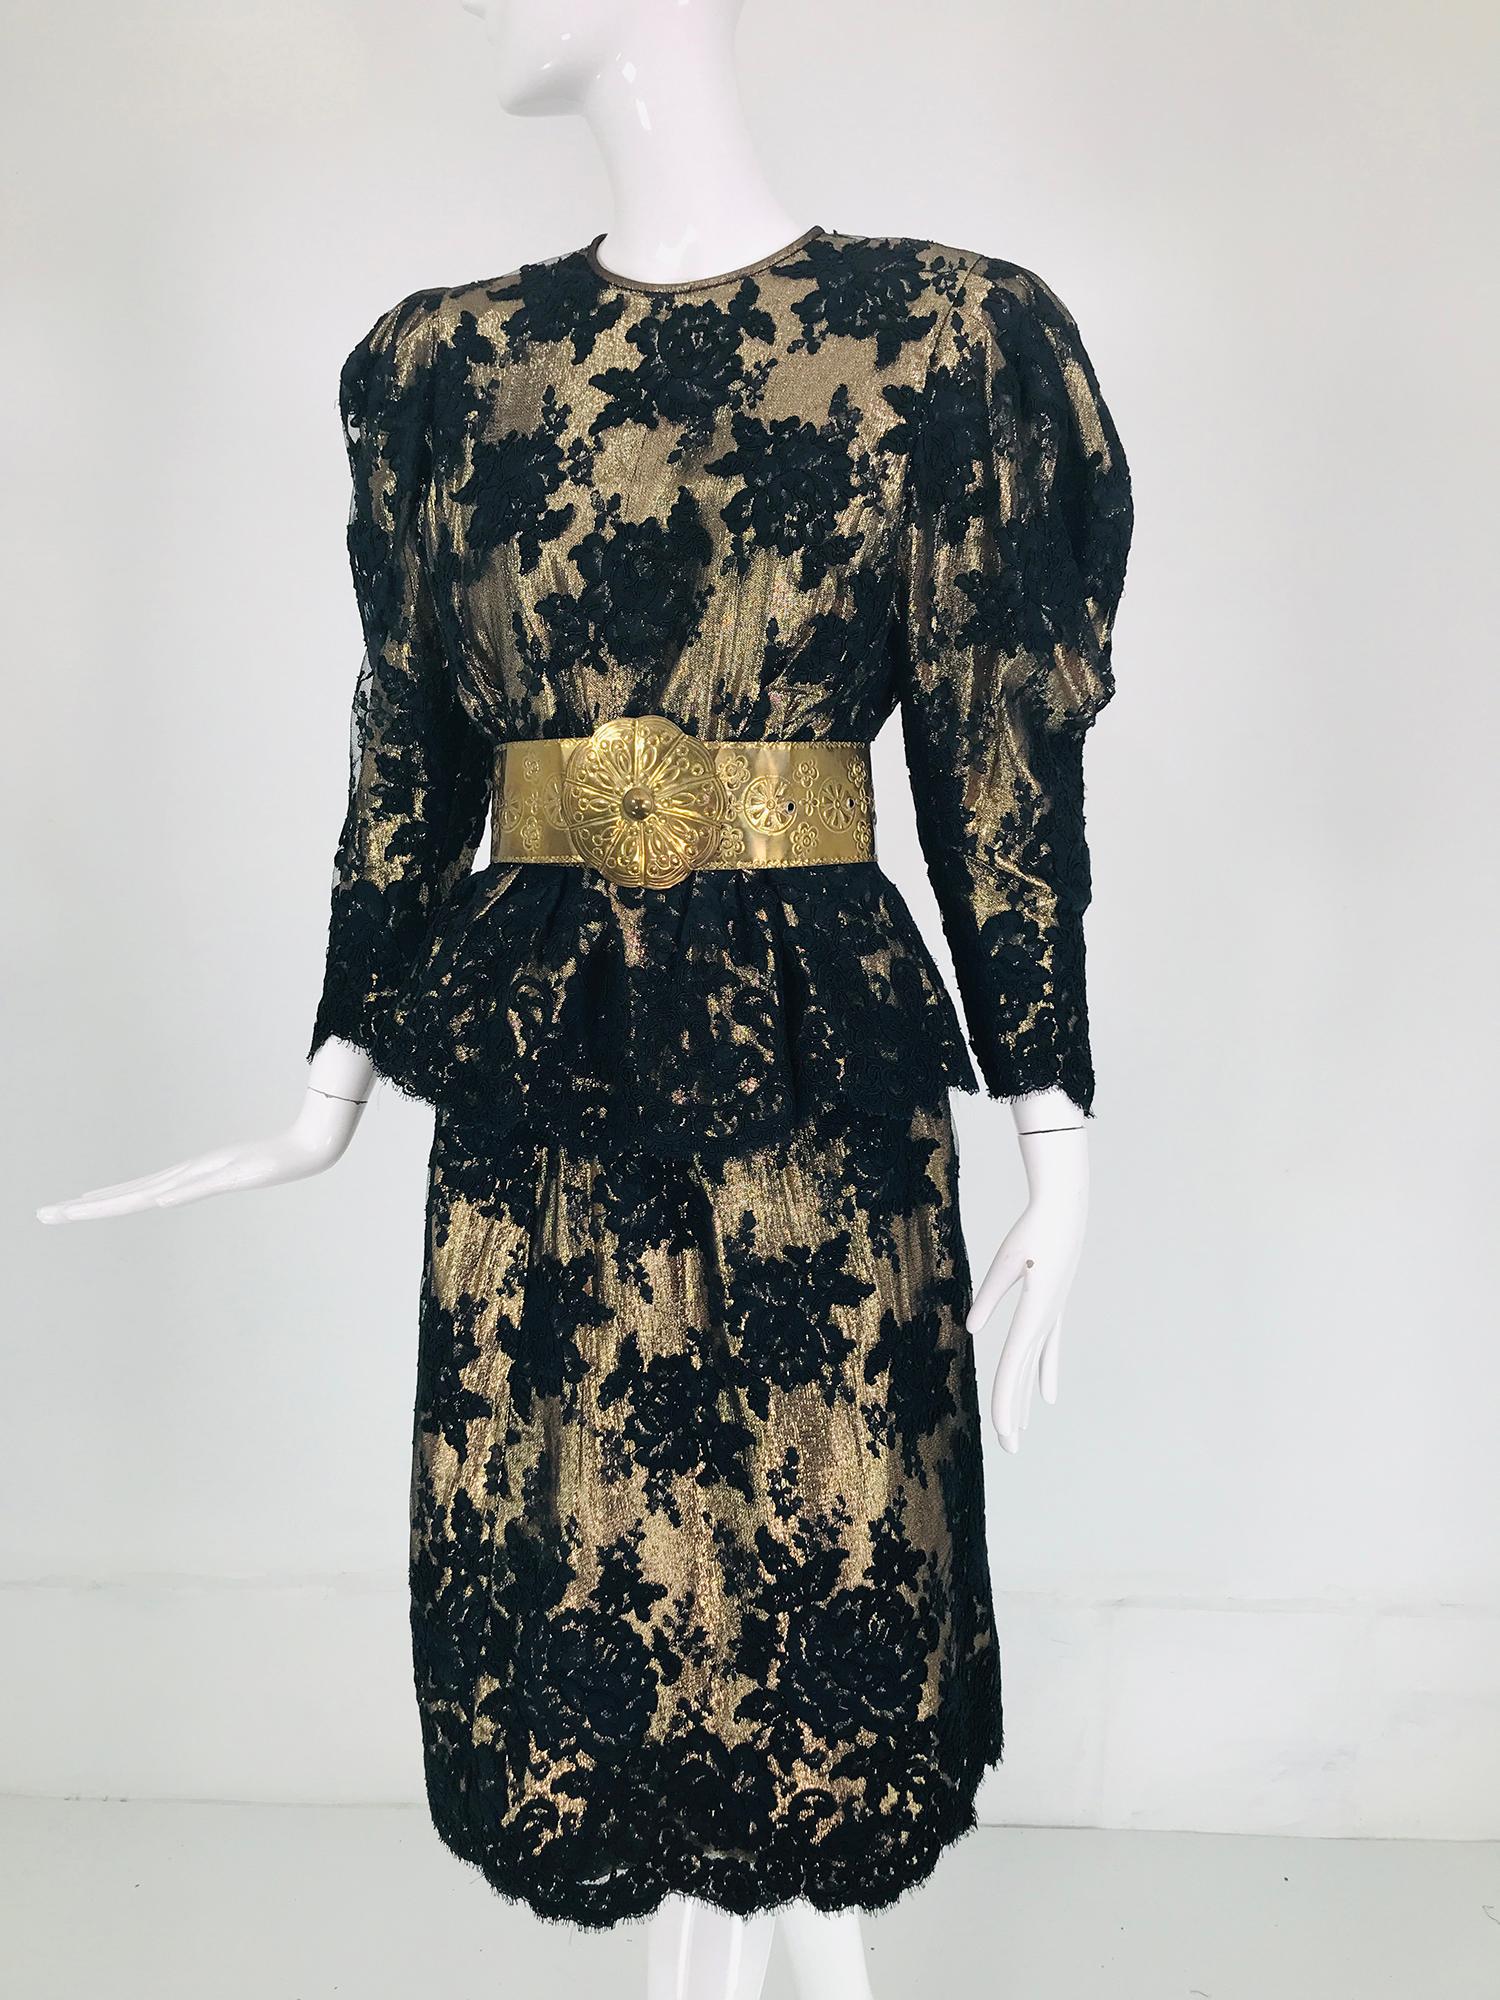 Pauline Trigere Black Guipure Lace over Gold Lame 1980s 2pc Skirt Set  For Sale 6